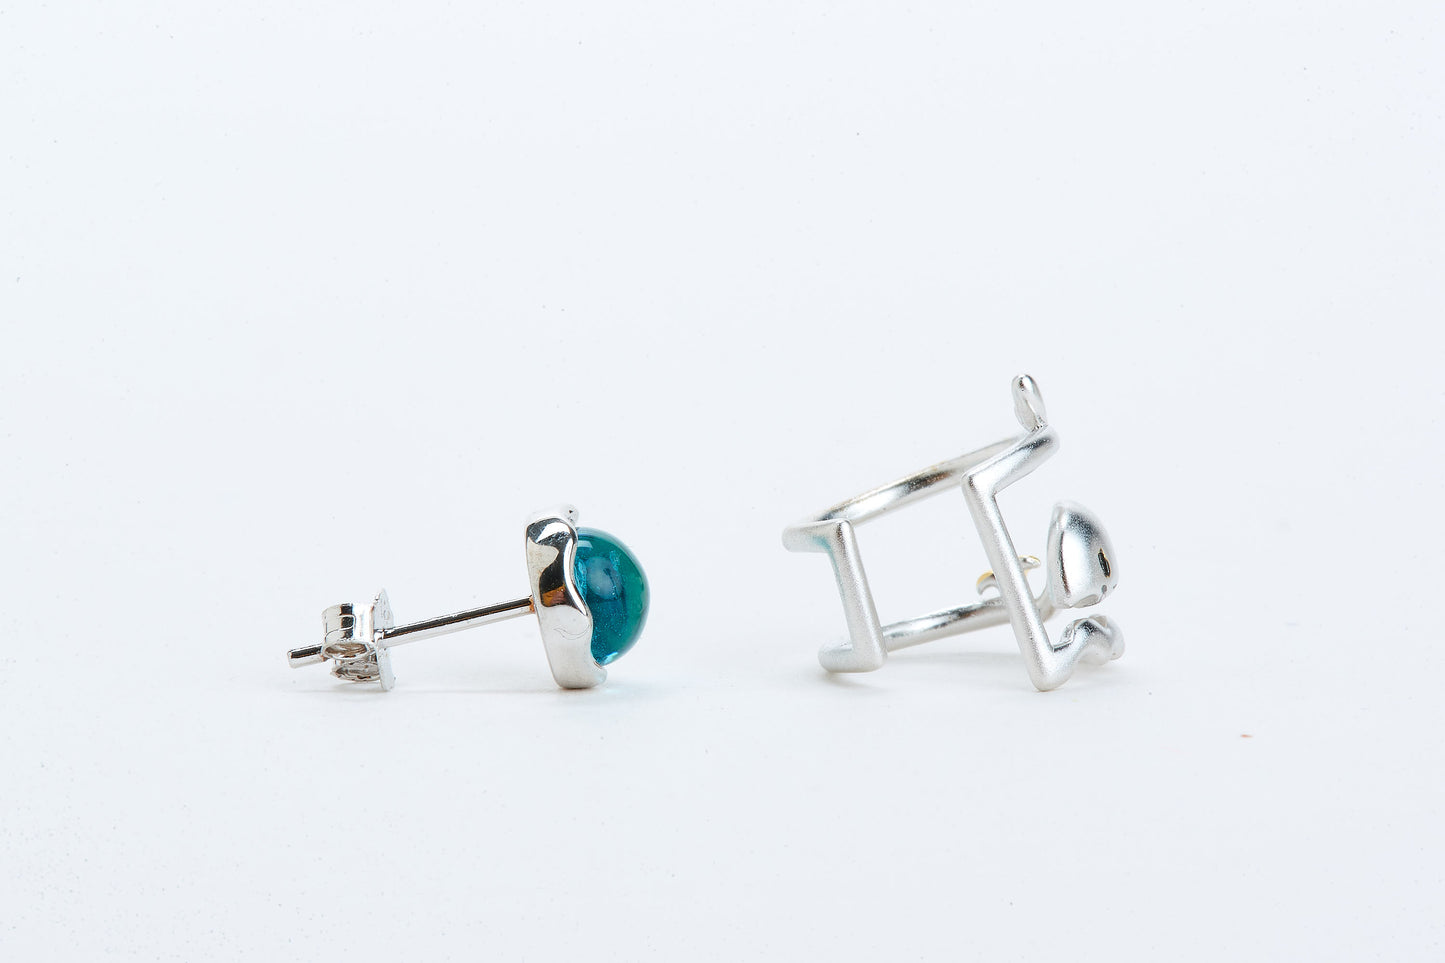 Whale and The Ocean Ear Studs & Cuffs - Lucid and Real